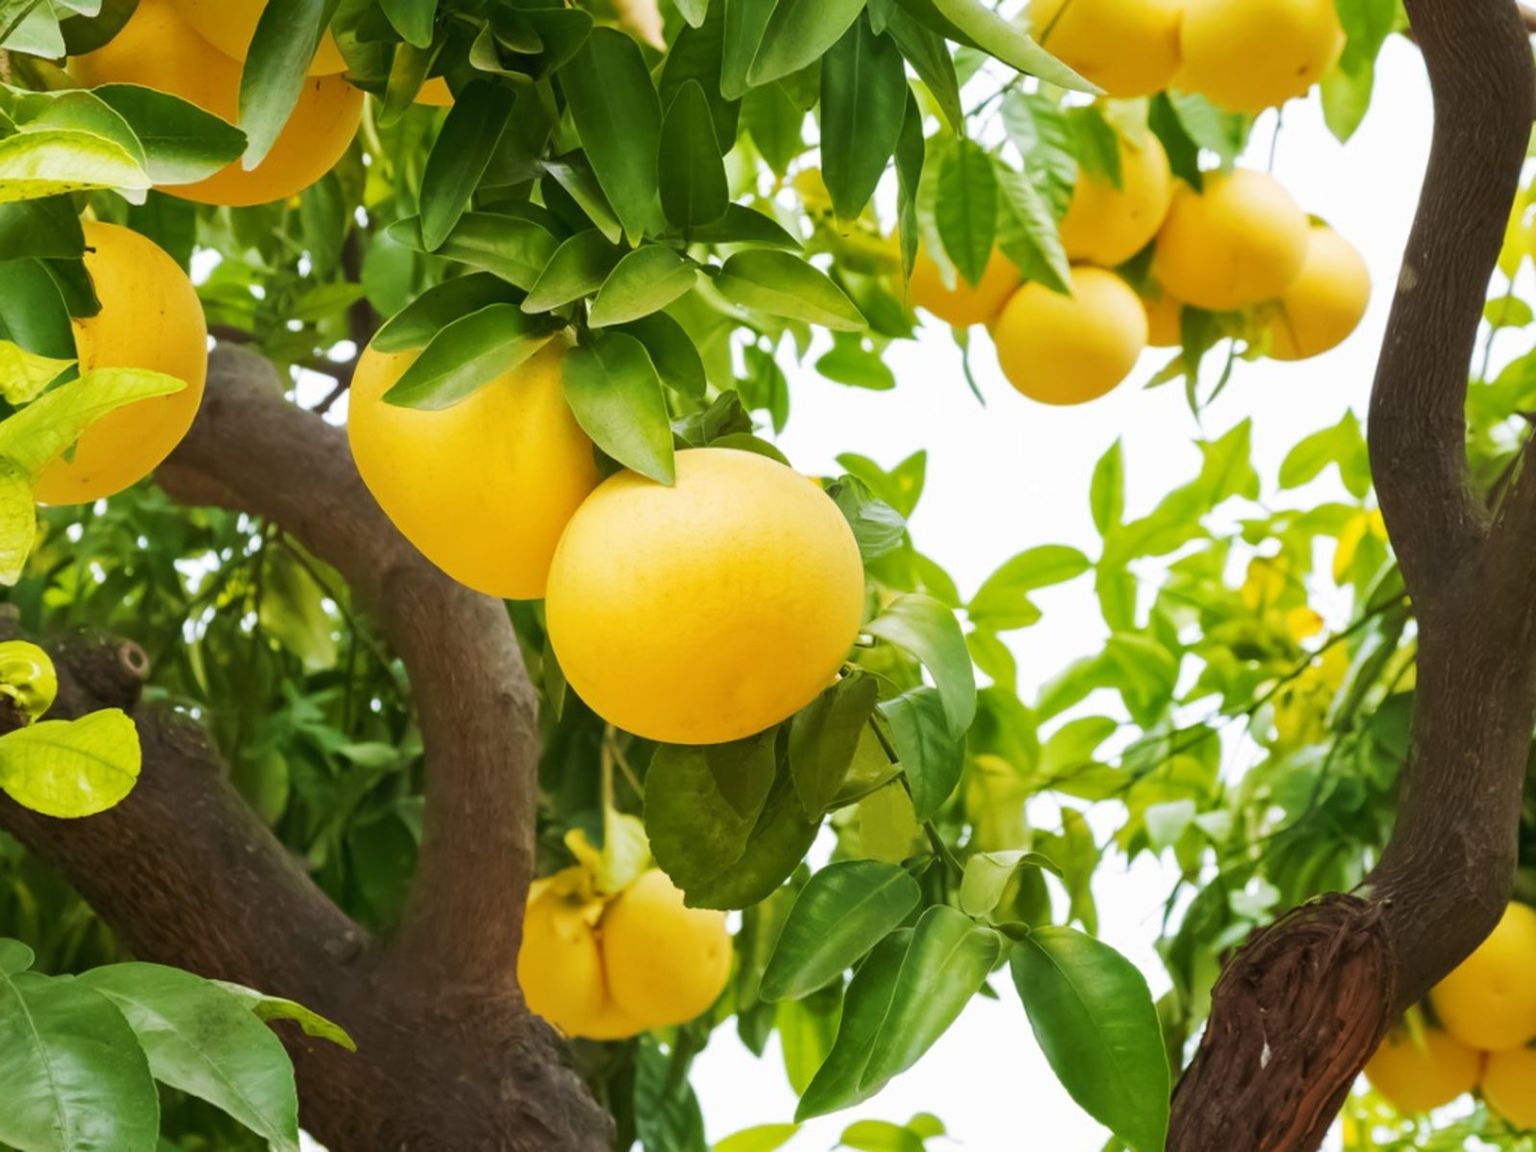 Growing A Grapefruit Tree: How To Care For Grapefruit Trees